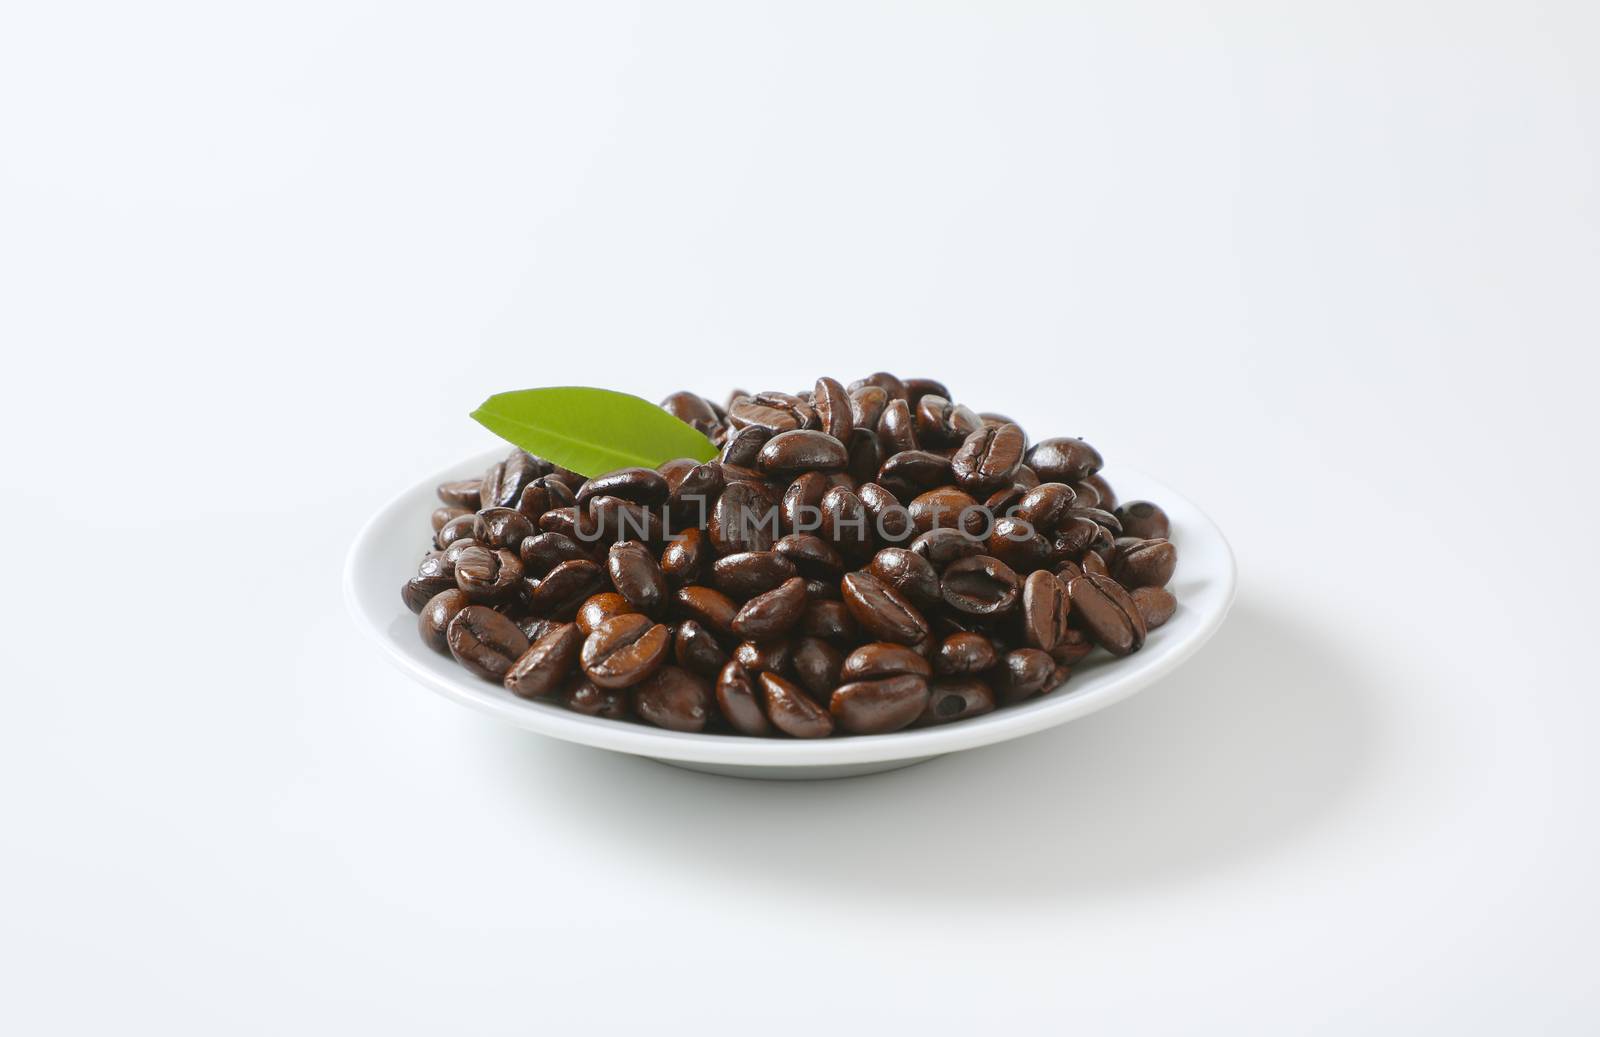 Roasted coffee beans on white plate